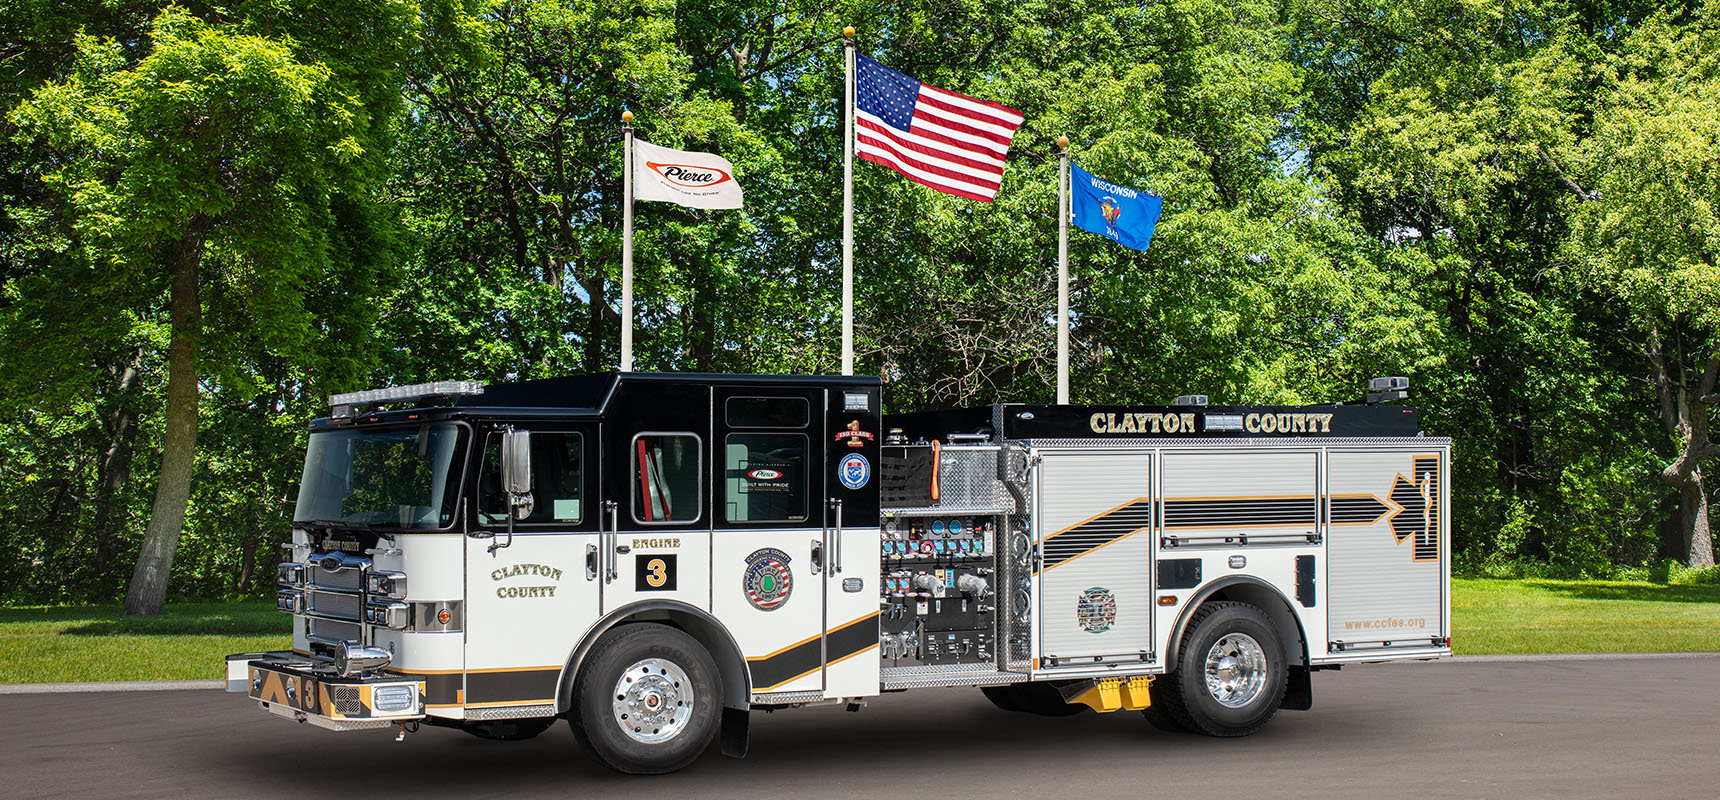 Clayton County Fire and Emergency Services has secured an order for 8 Pierce custom Enforcer pumpers.